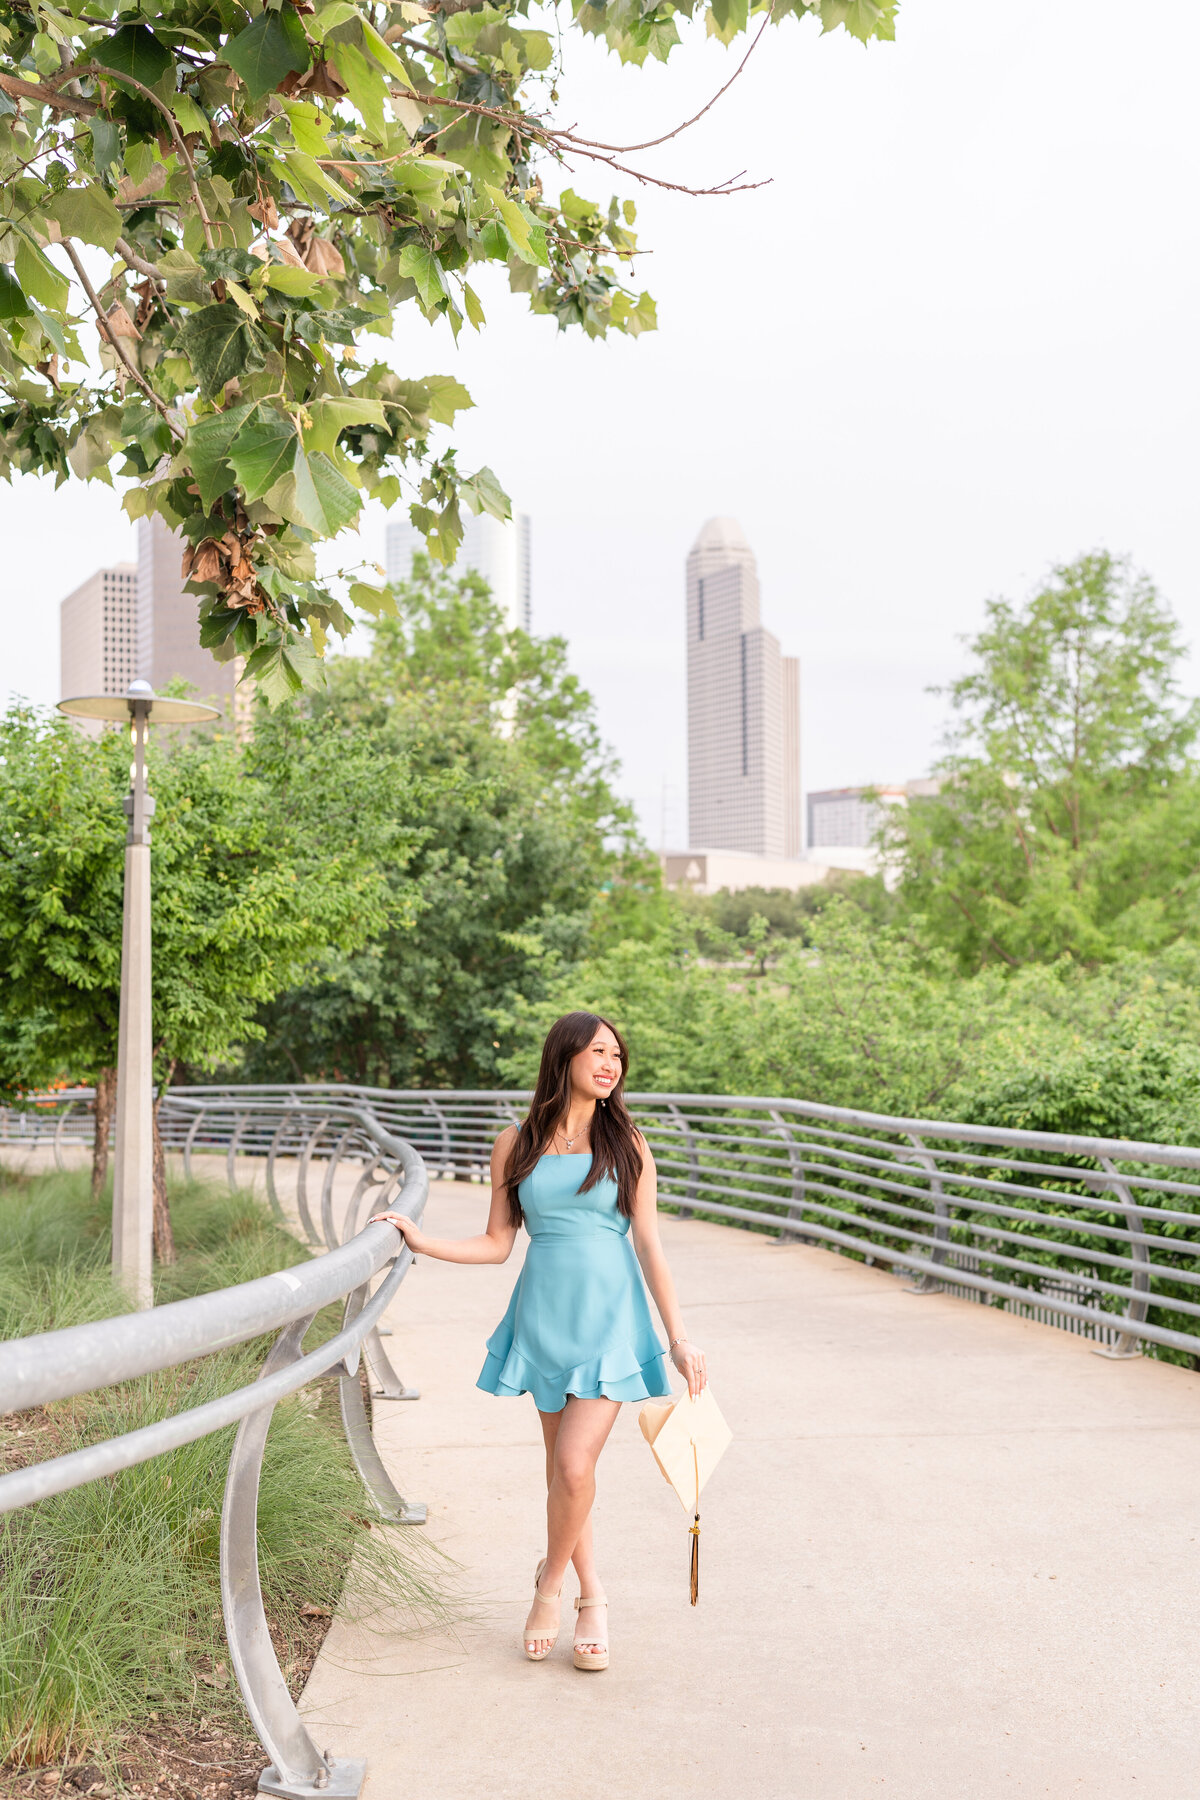 Houston senior girl holding onto railing and holding cap while smiling away in middle of park in Downtown Houston while wearing baby blue dress